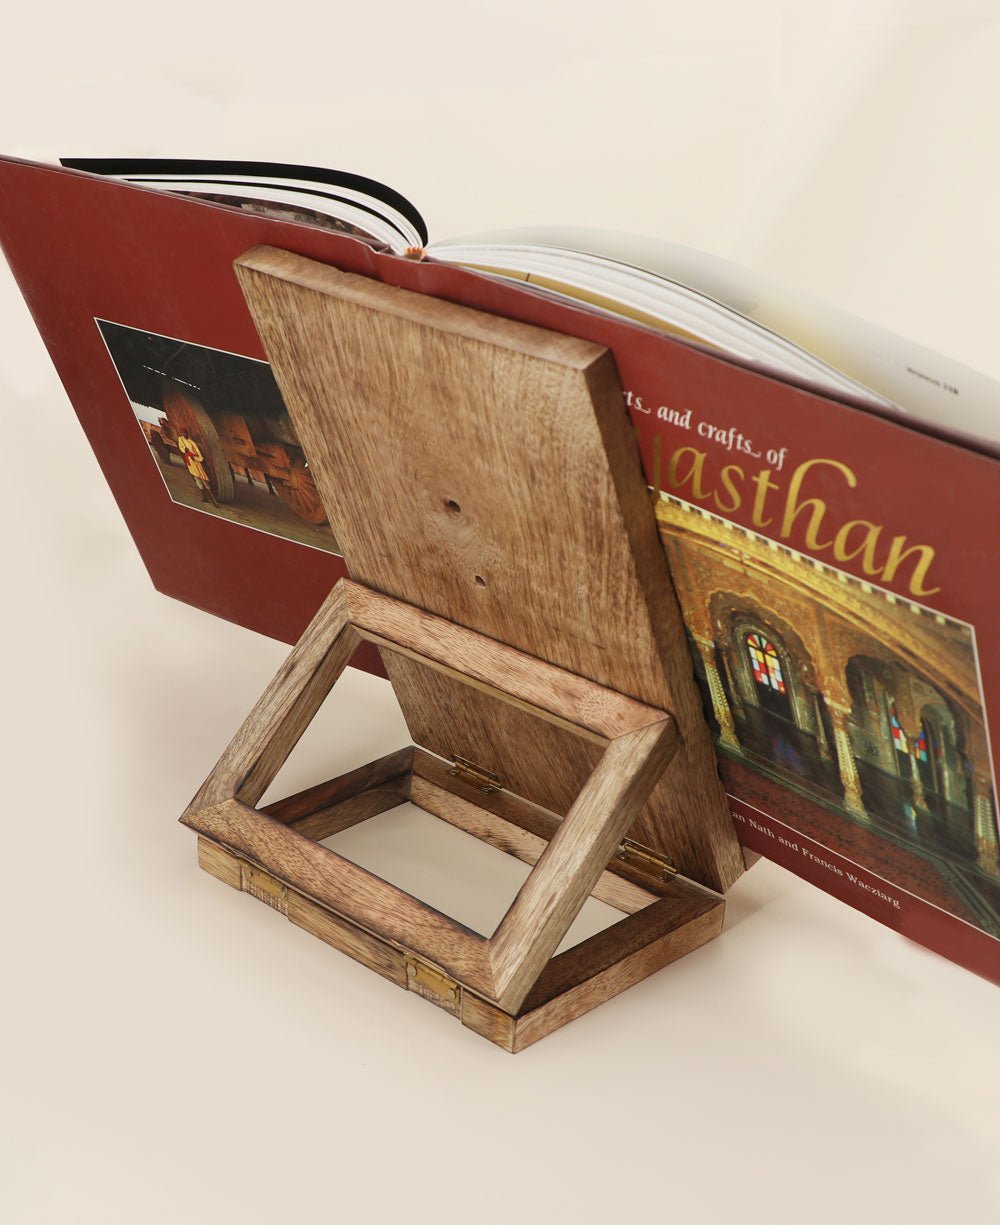 Fair Trade Carved Mandala Design Tablet And Book Stand - Book Stands & Rests